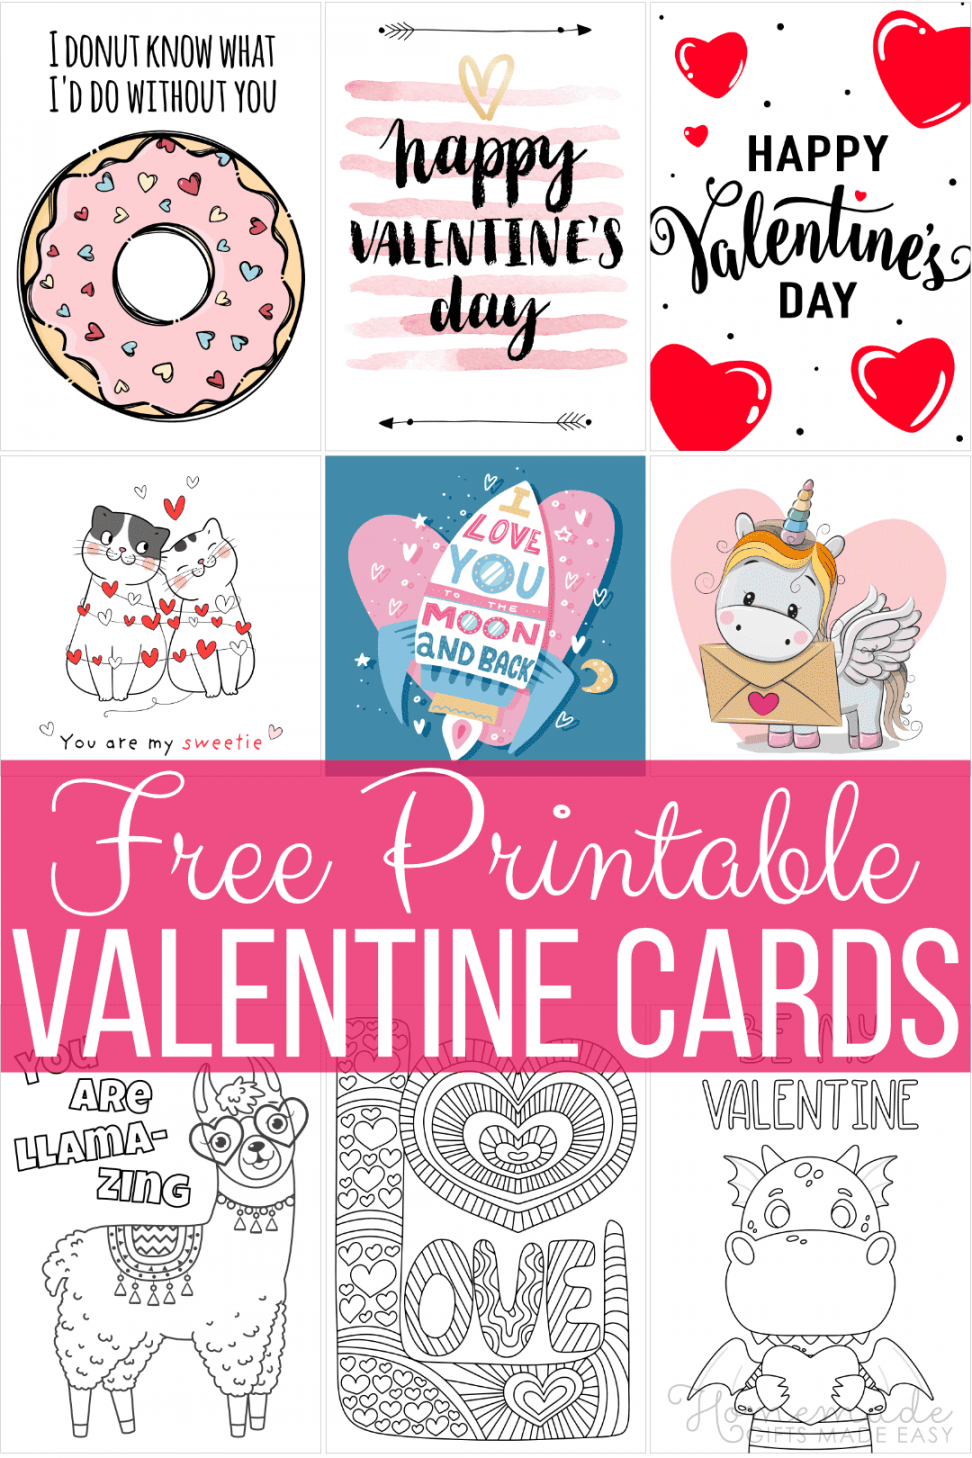 Free Printable Valentine Cards for  - FREE Printables - Free Printable Valentines Day Cards For Students